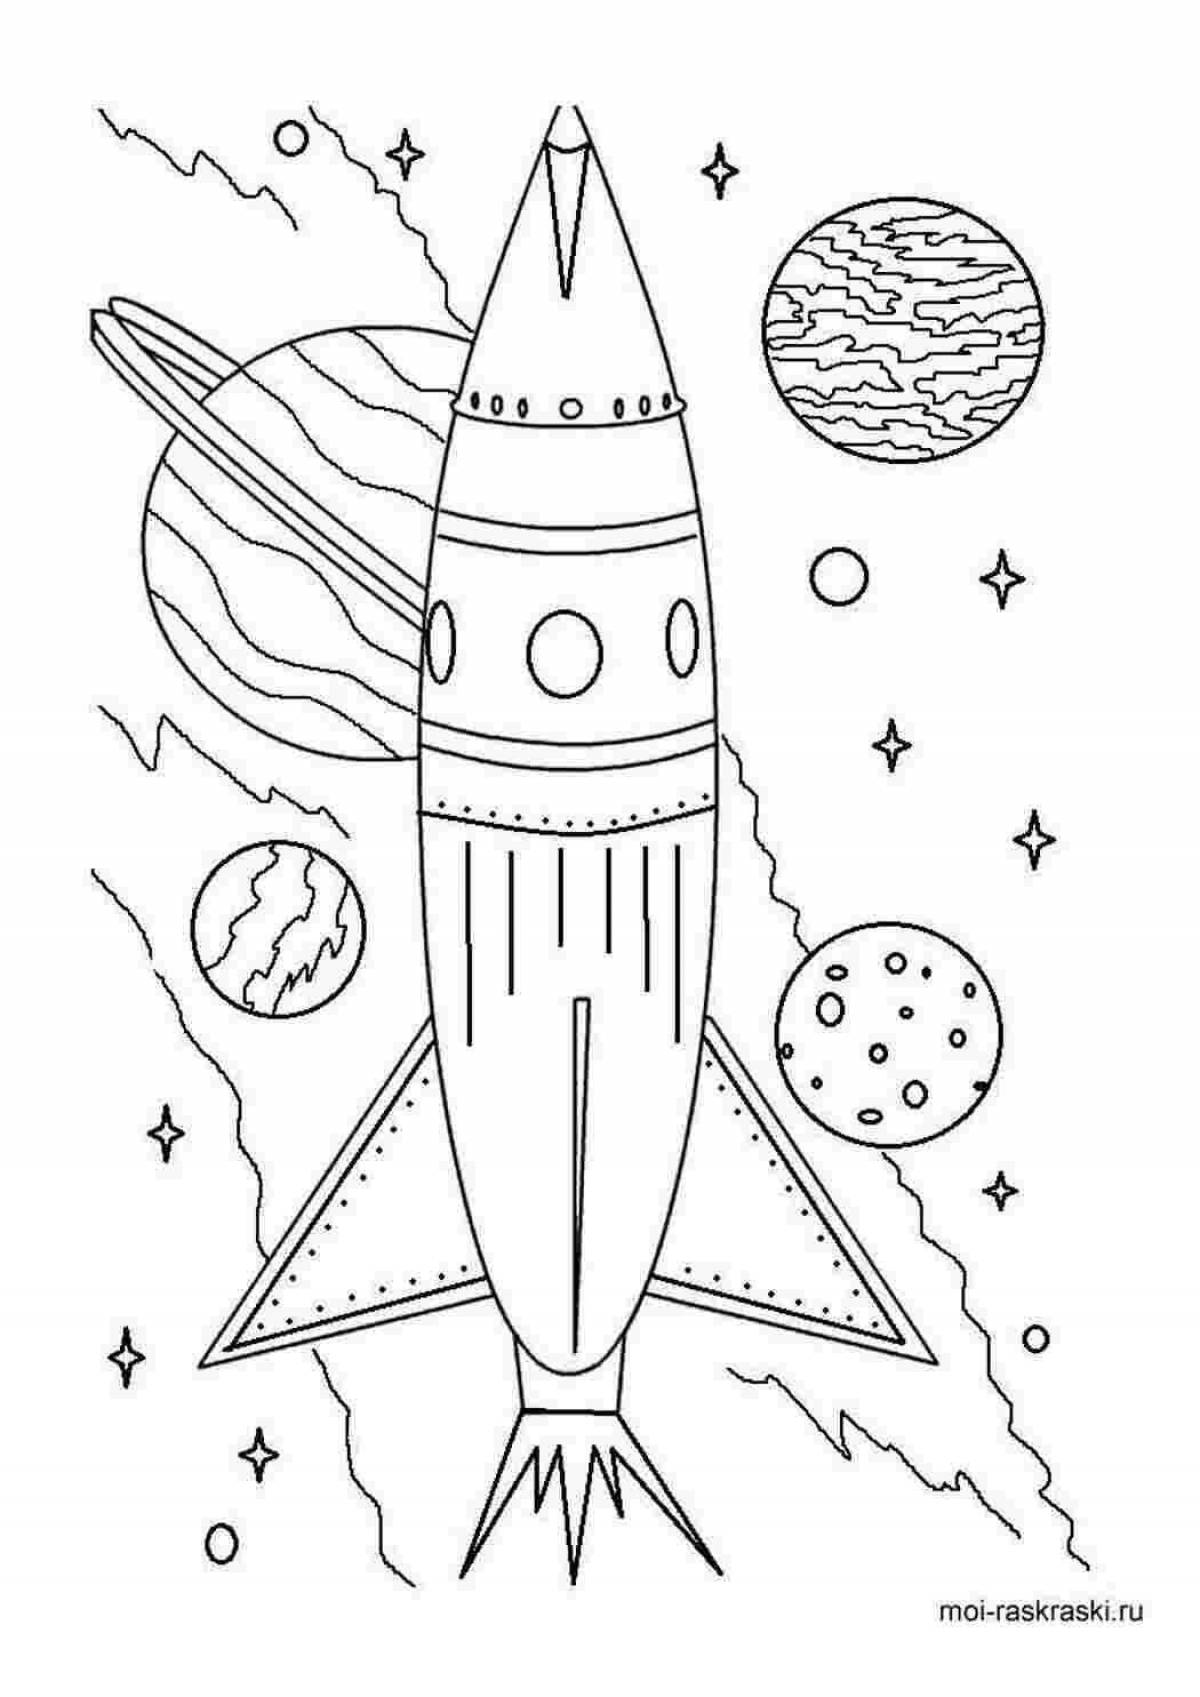 Fun rockets in space for kids